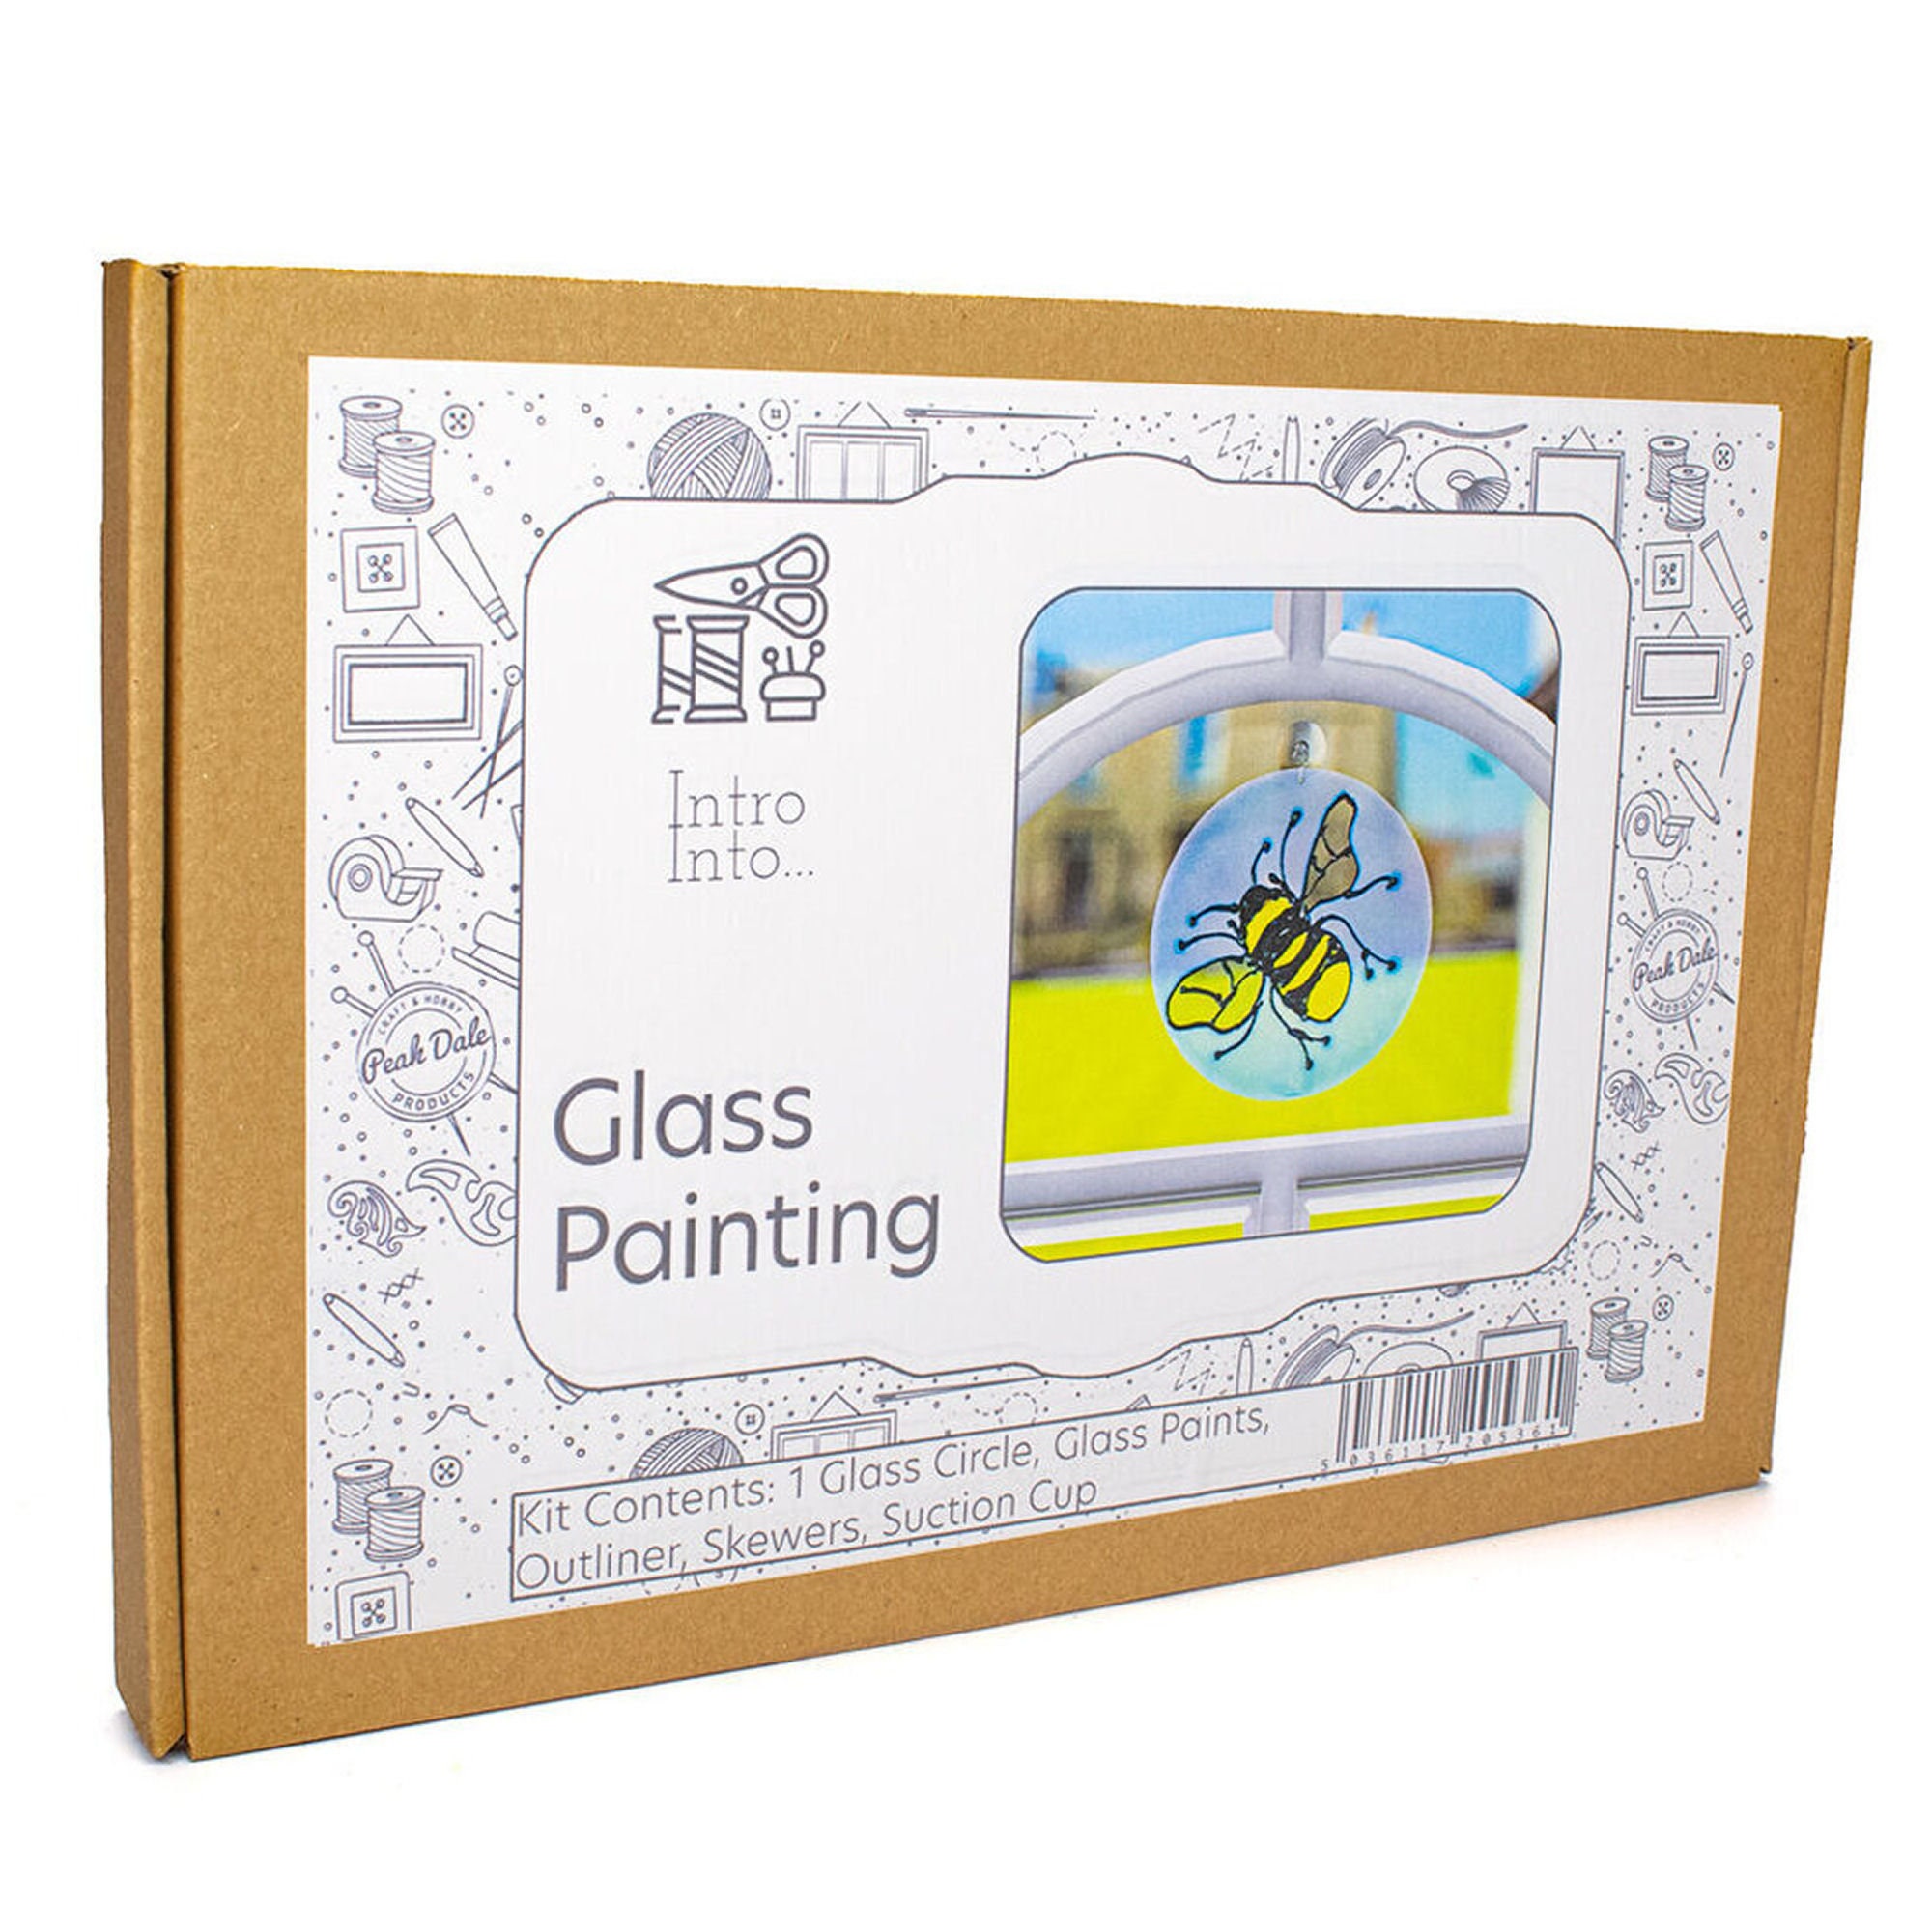 Glass Painting Starter Kit Perfect for Those Who Wish to Start Crafting or  as A Hobby Contains Everything You Need. 